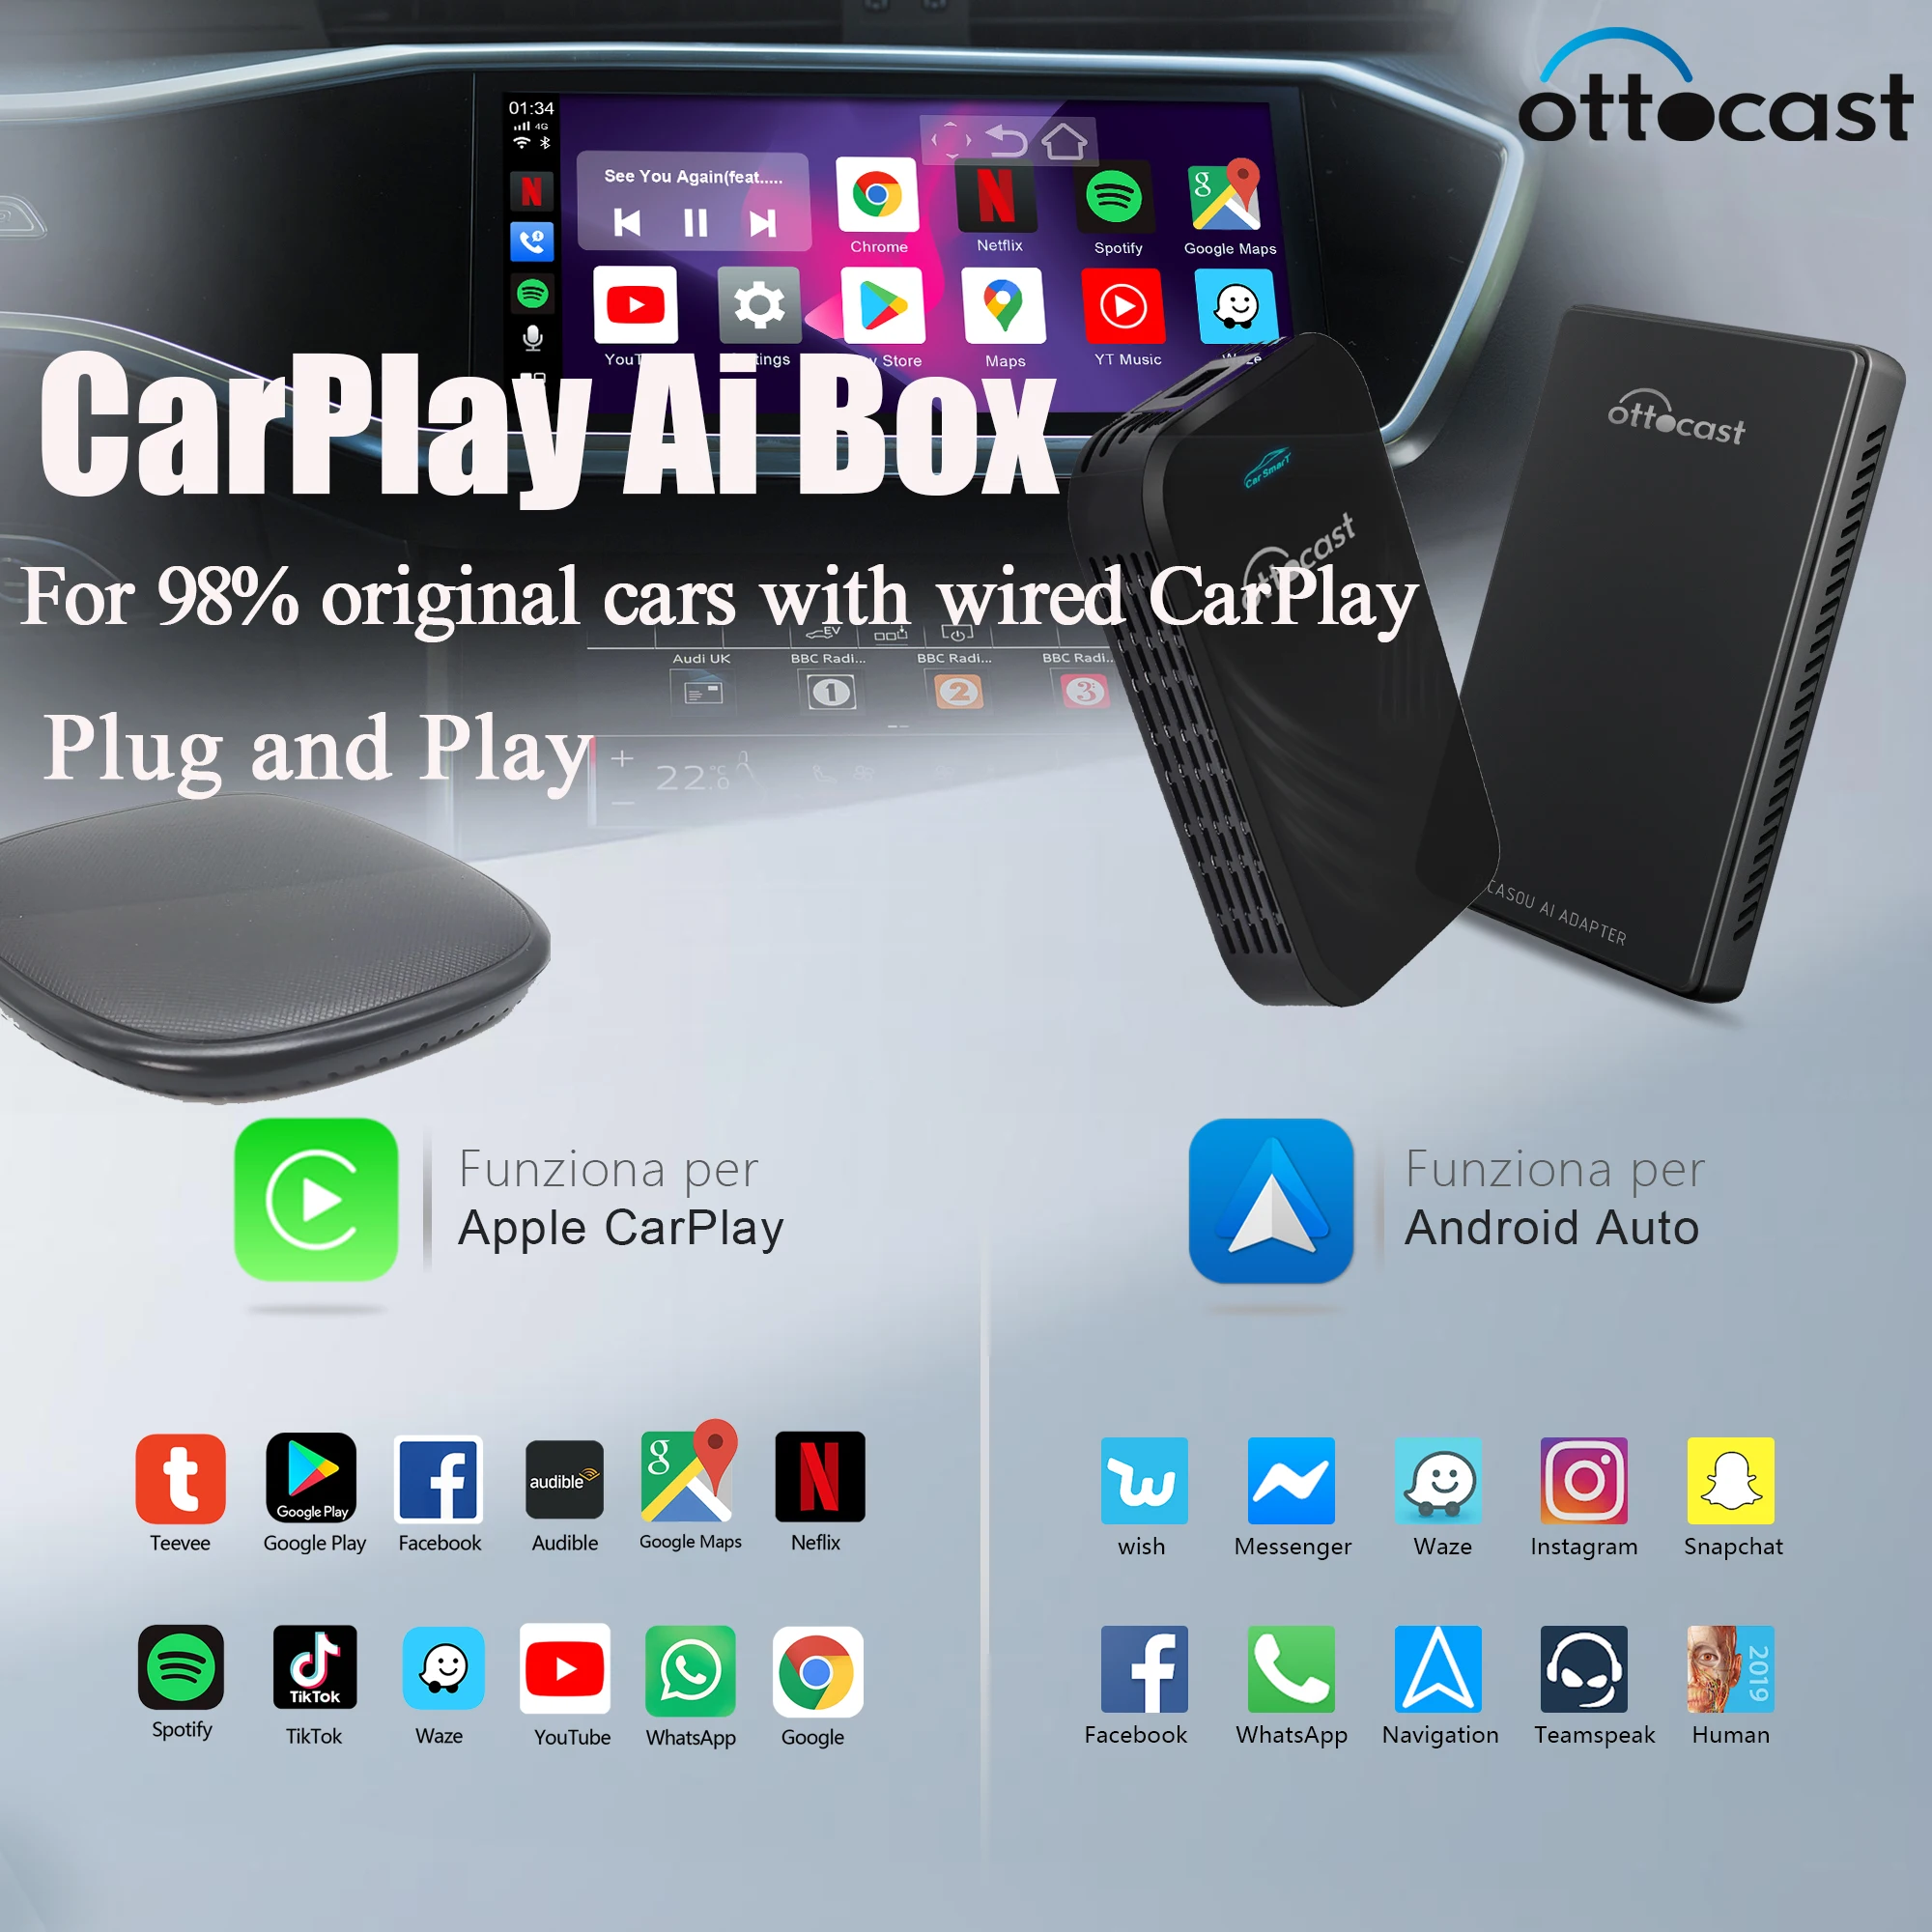 CarPlay AI BOX Eight Core 4+64G Android9.0 CarPlay Adapter Multimedia Player Wireless CarPlay Android Auto car intelliget system